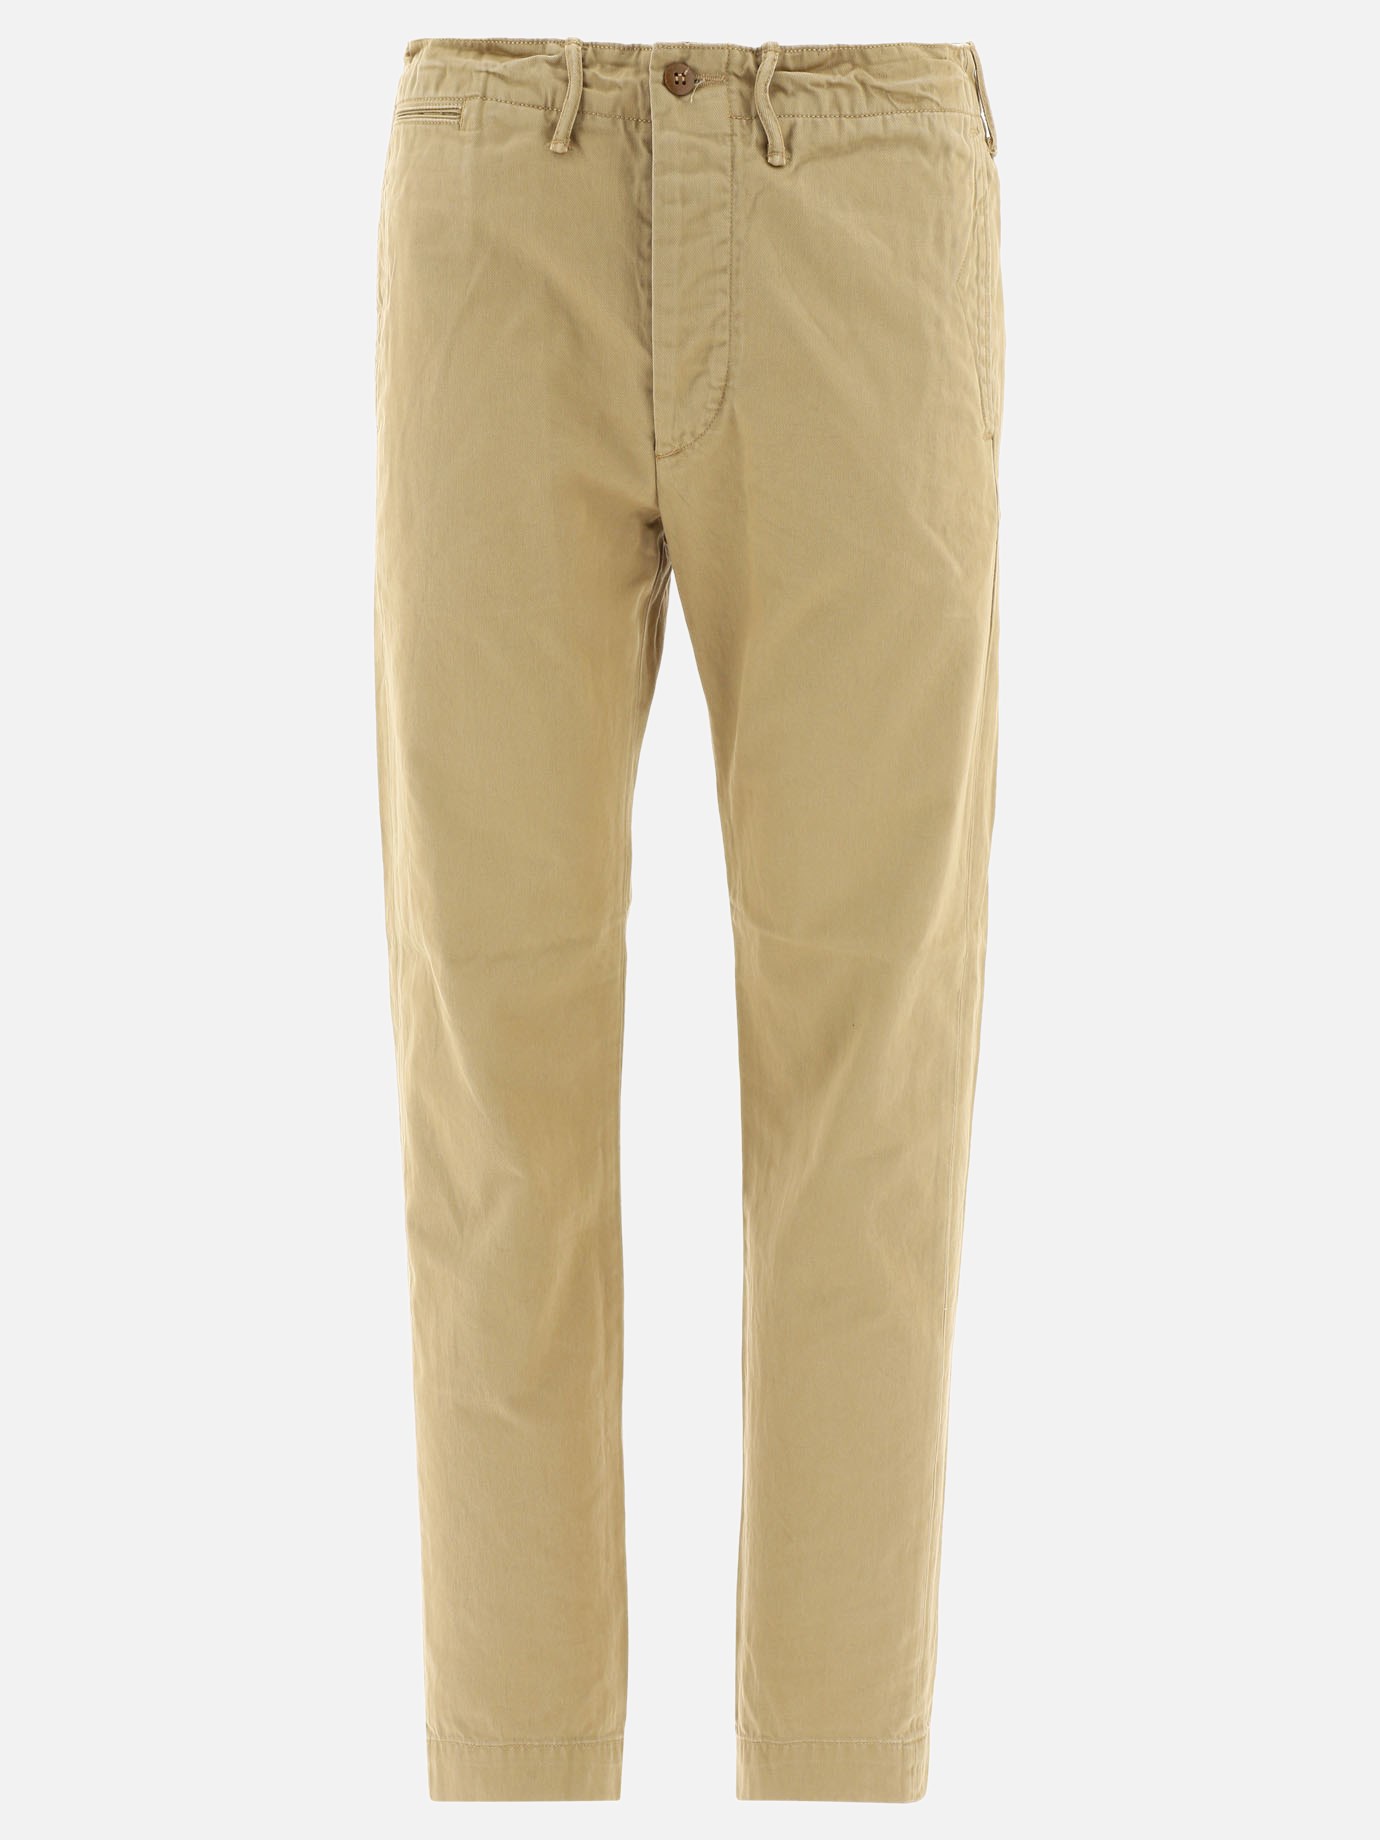  Officer's  chino trousersby RRL by Ralph Lauren - 3